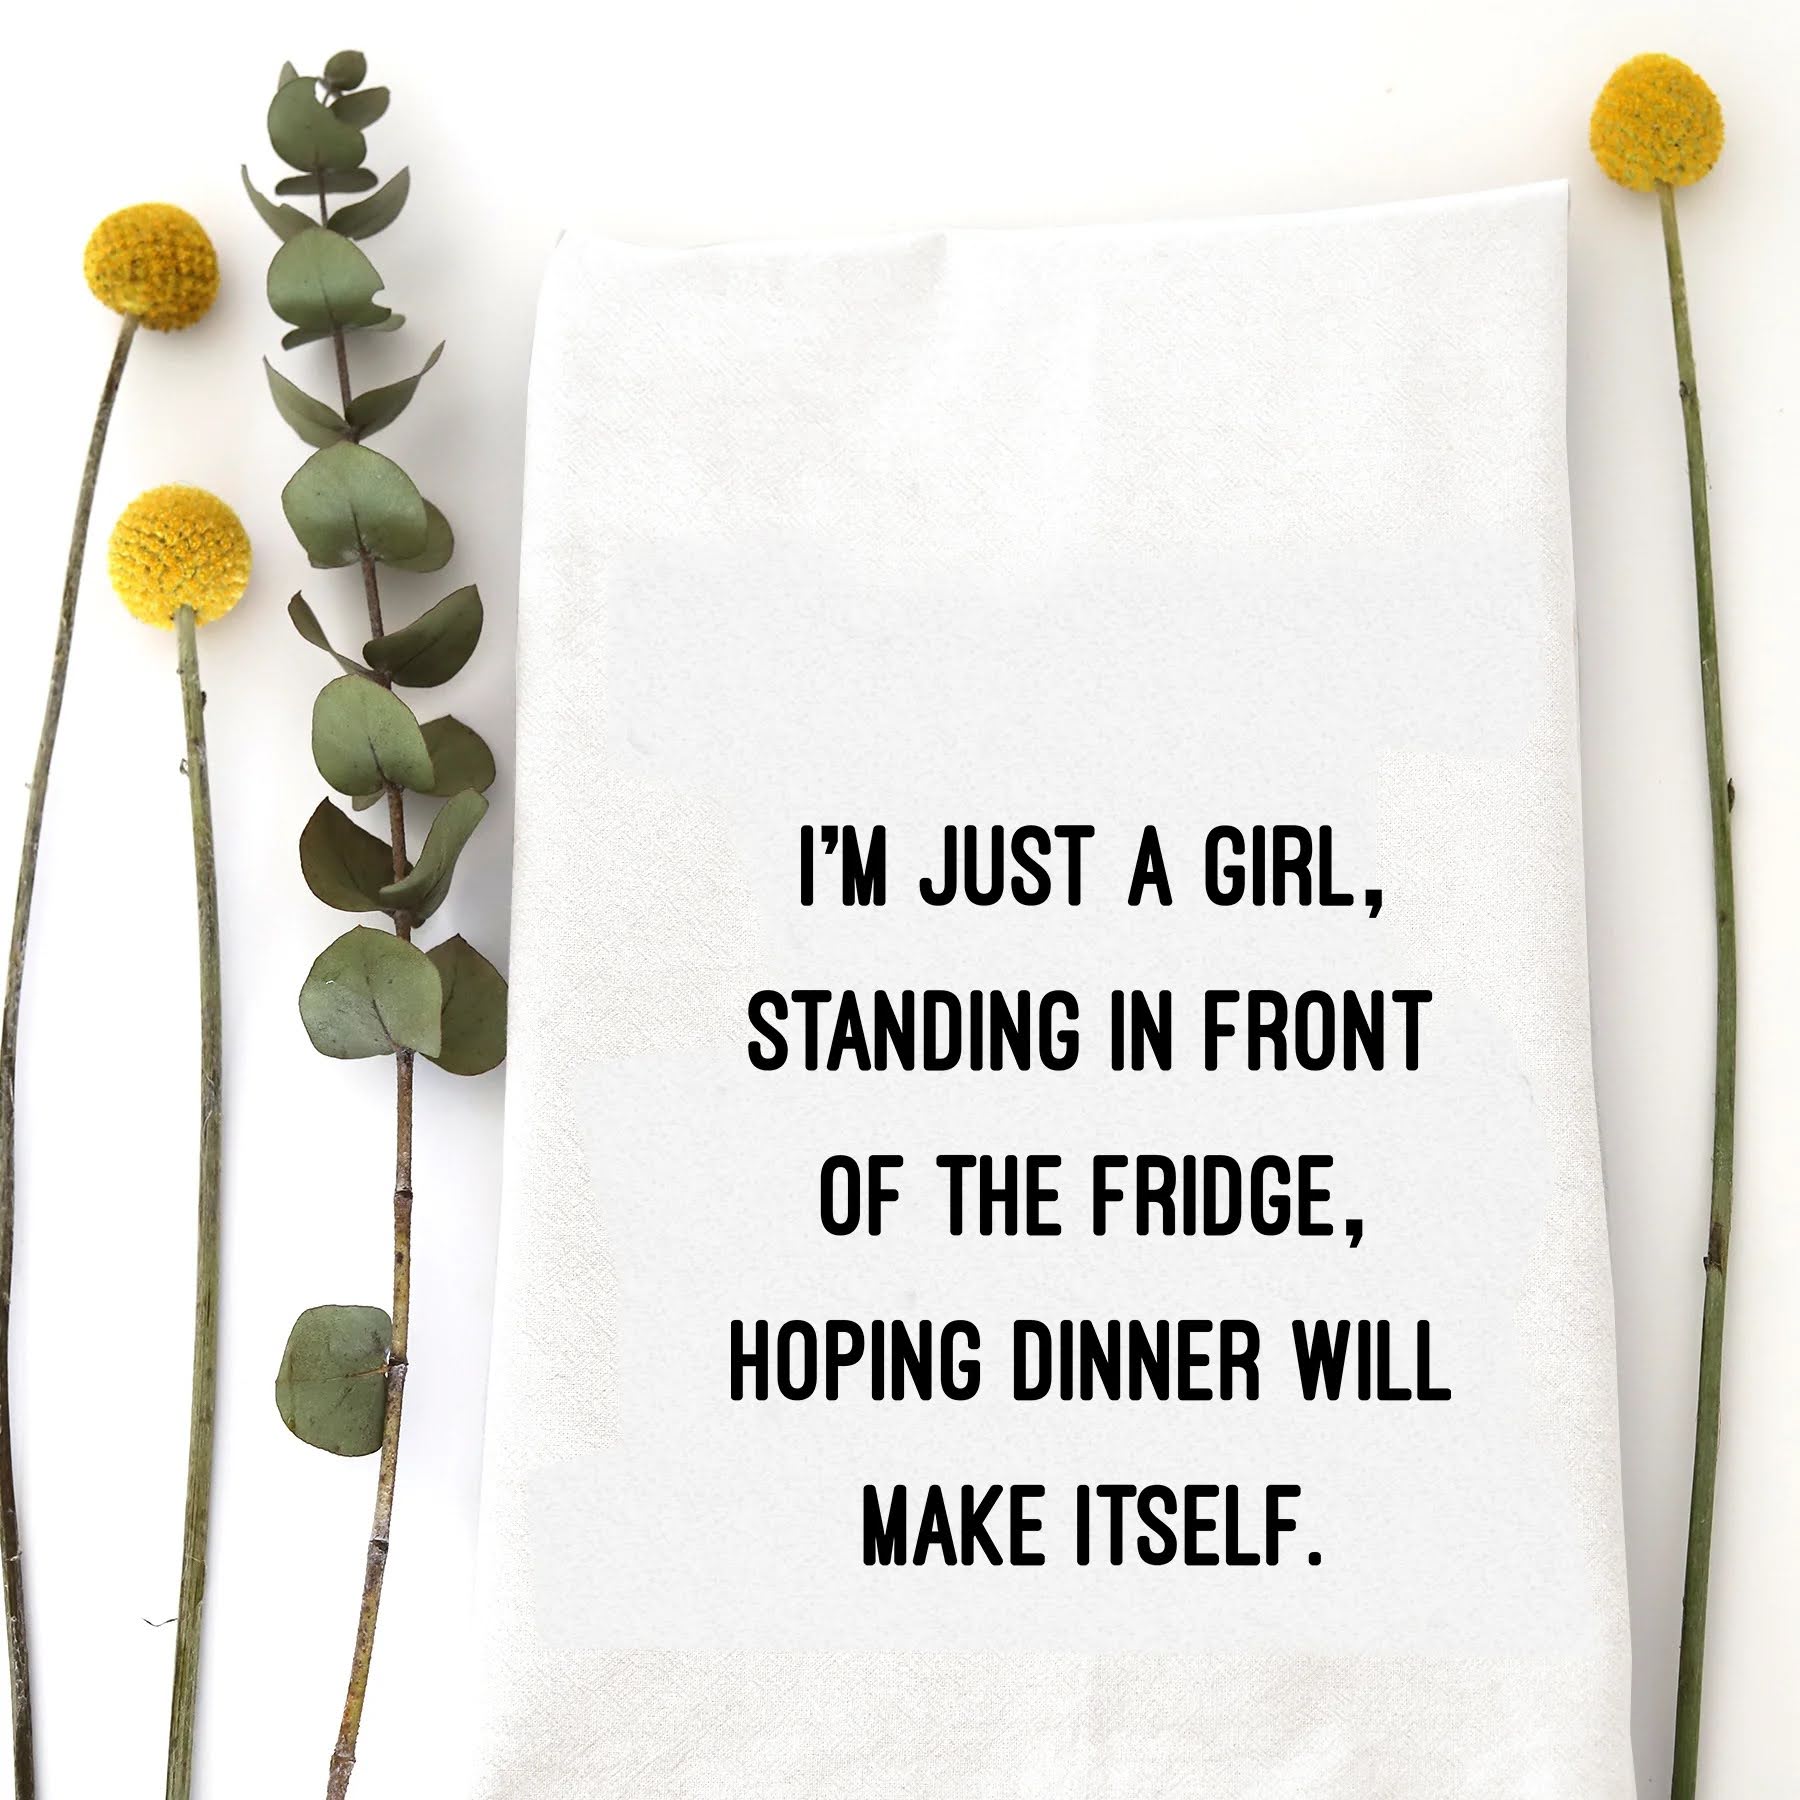 A tea towel with a funny saying - I'm just a girl, standing in front of the fridge, hoping dinner will make itself.